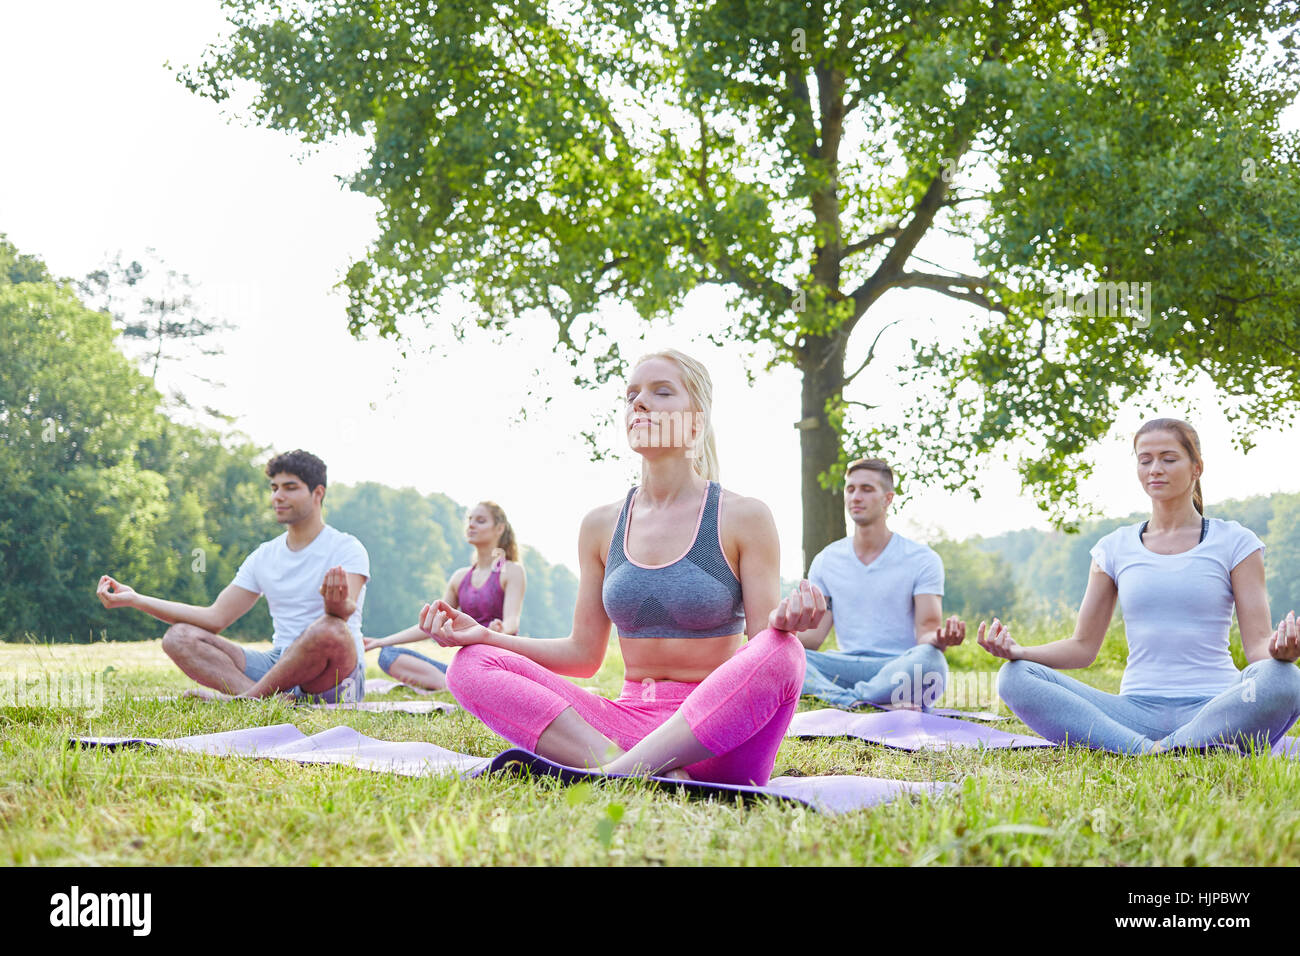 Group of people meditating in the park for welness and good health Stock Photo